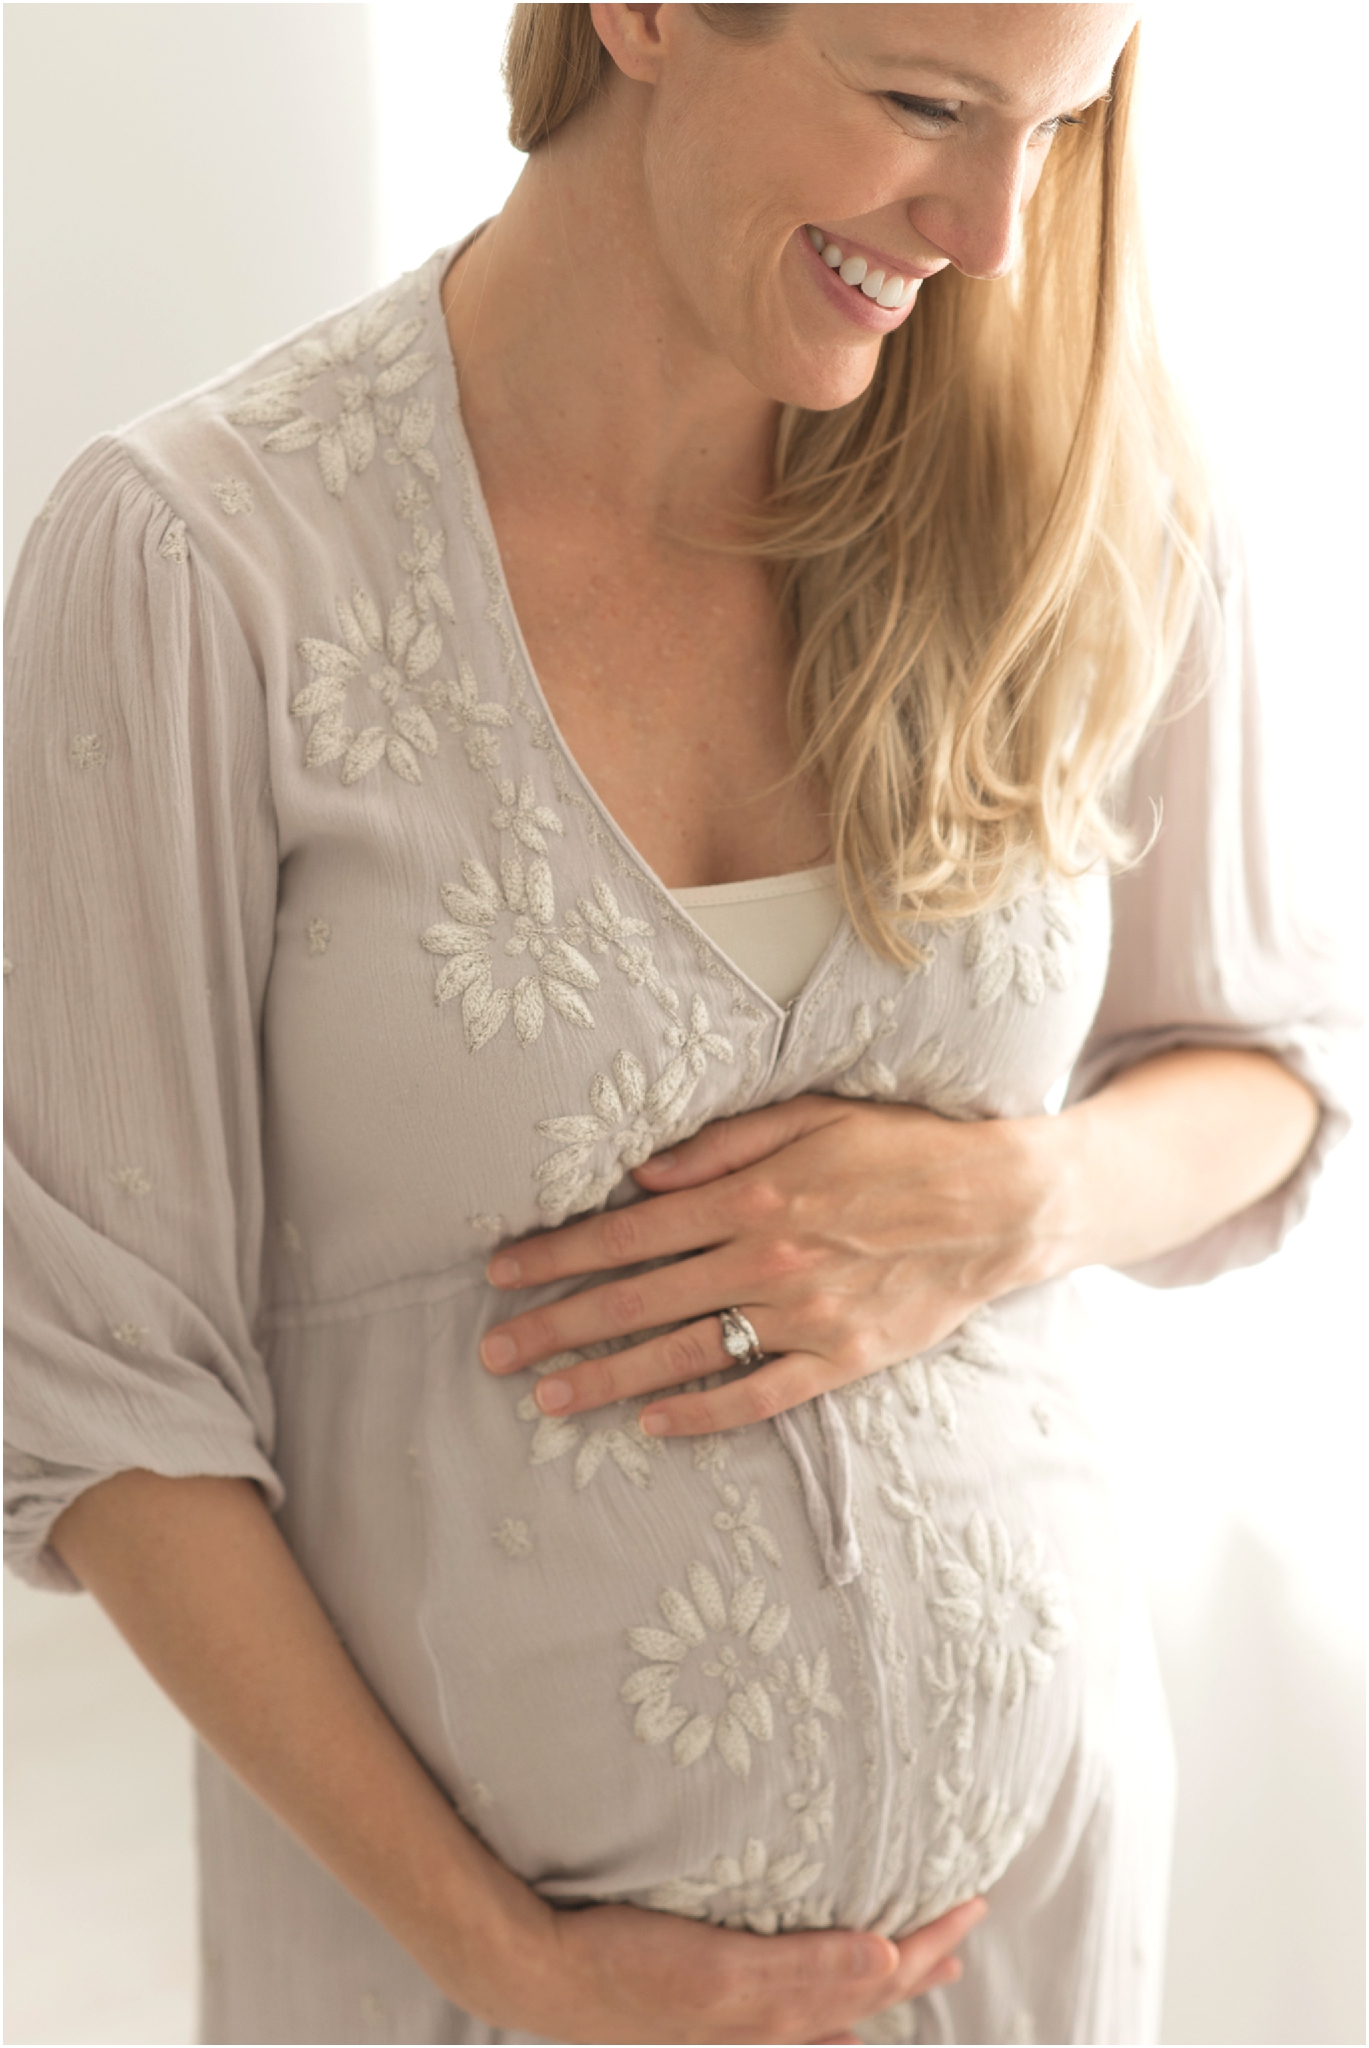 Woman holding stomach in maternity photo.